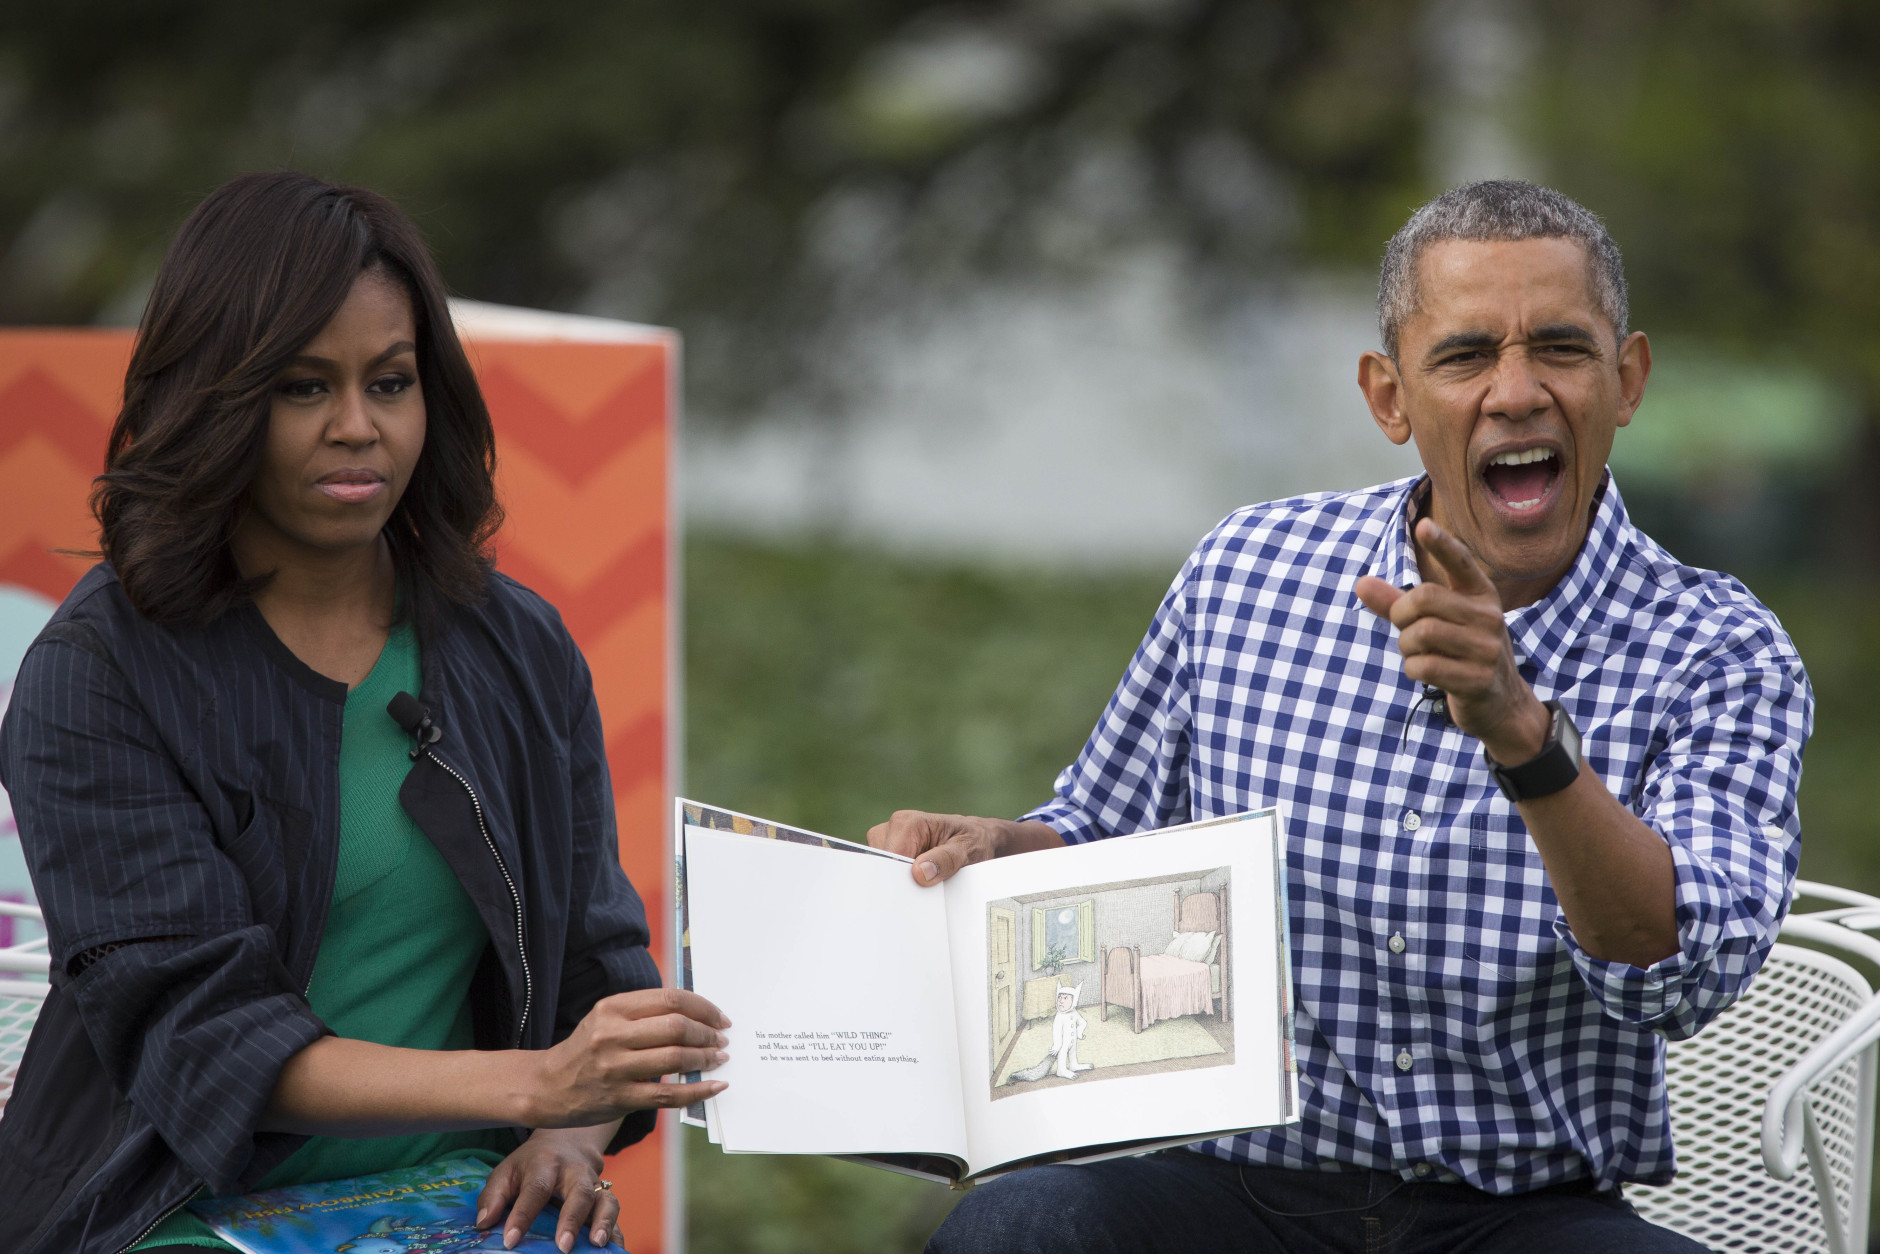 WASHINGTON, DC - MARCH 28: President Barack Obama and first lady Michelle Obama read from the book "Where the Wild Things Are" during the annual White House Easter Egg Roll on the South Lawn of the White House March 28, 2016 in Washington, DC. The tradition dates back to 1878 when President Rutherford B. Hayes allowed children to roll eggs on the South Lawn. (Photo by Drew Angerer/Getty Images)